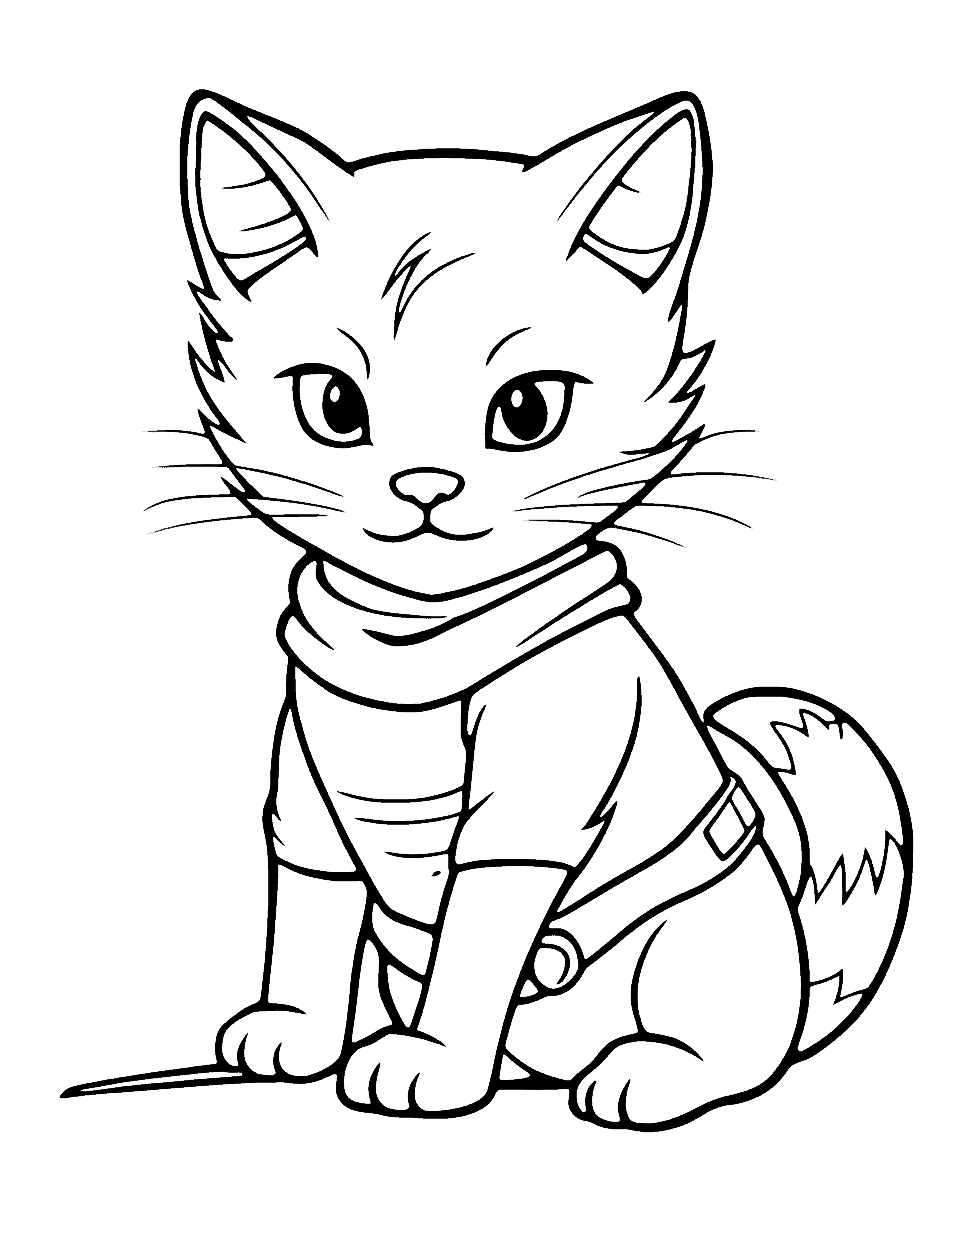 Anime Warrior Cat Coloring Page - An anime-style warrior cat with a determined expression, ready for battle.